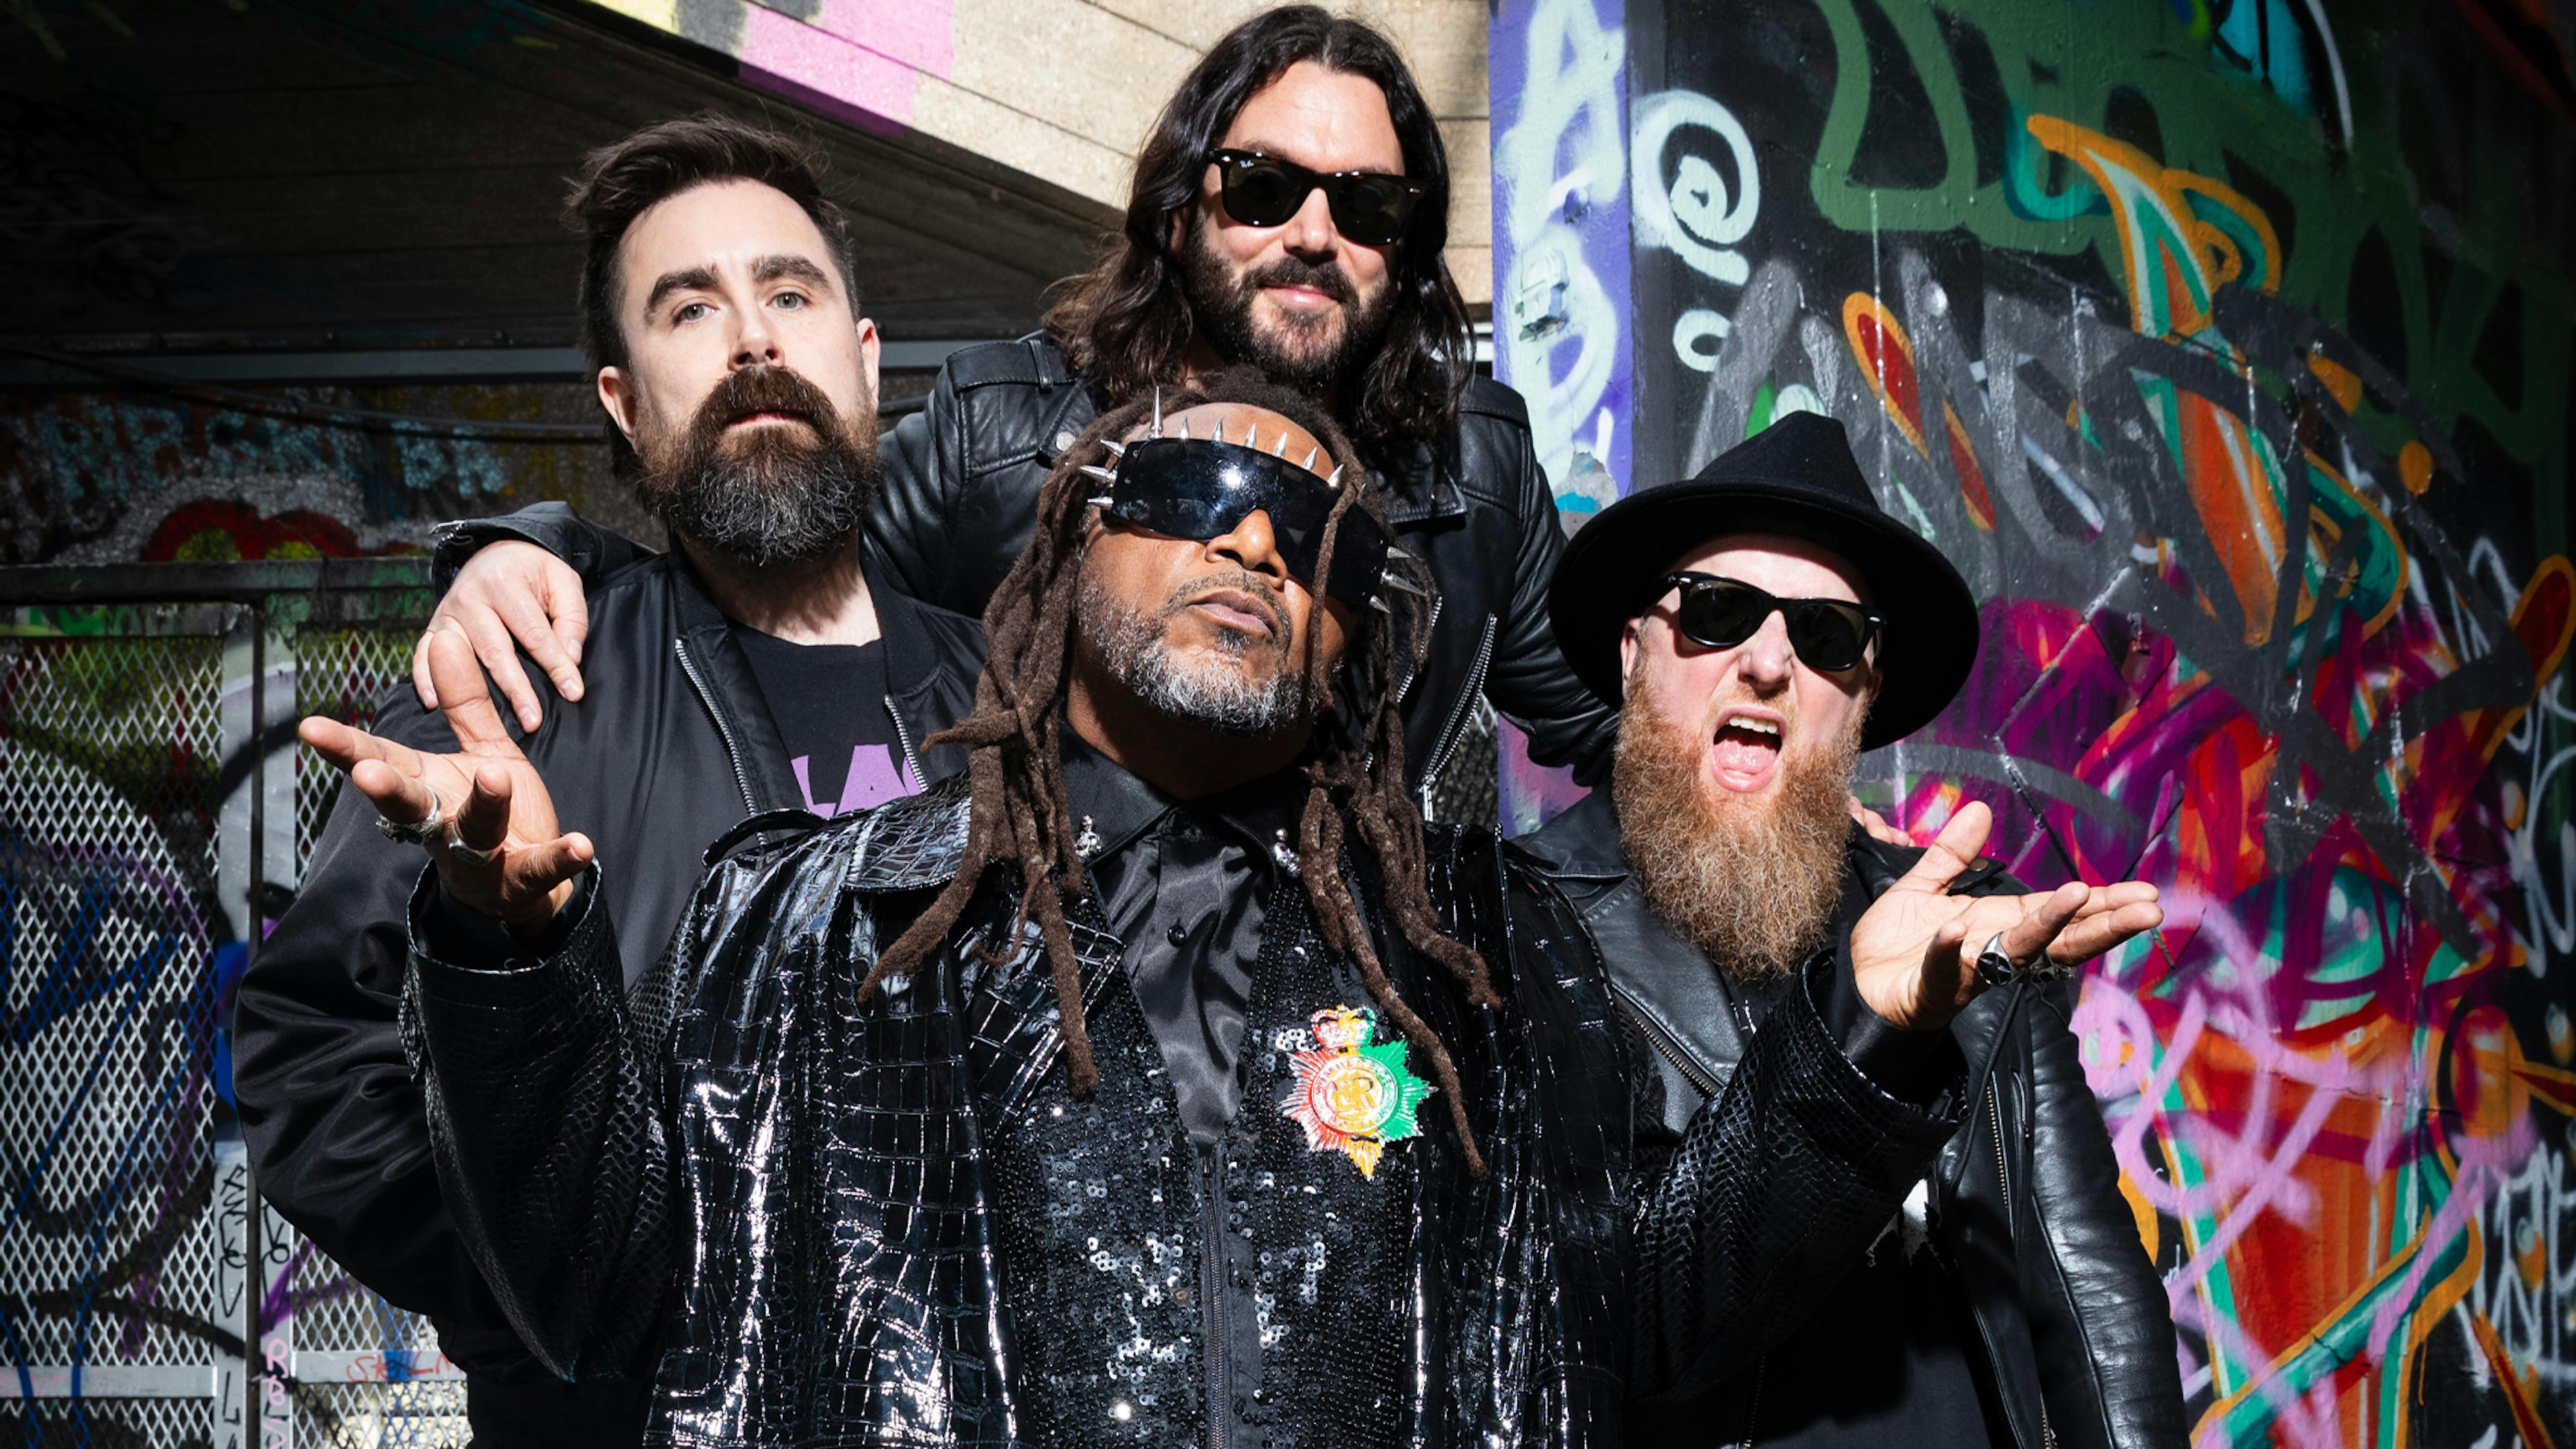 Skindred just won Best Alternative at this year’s MOBO Awards